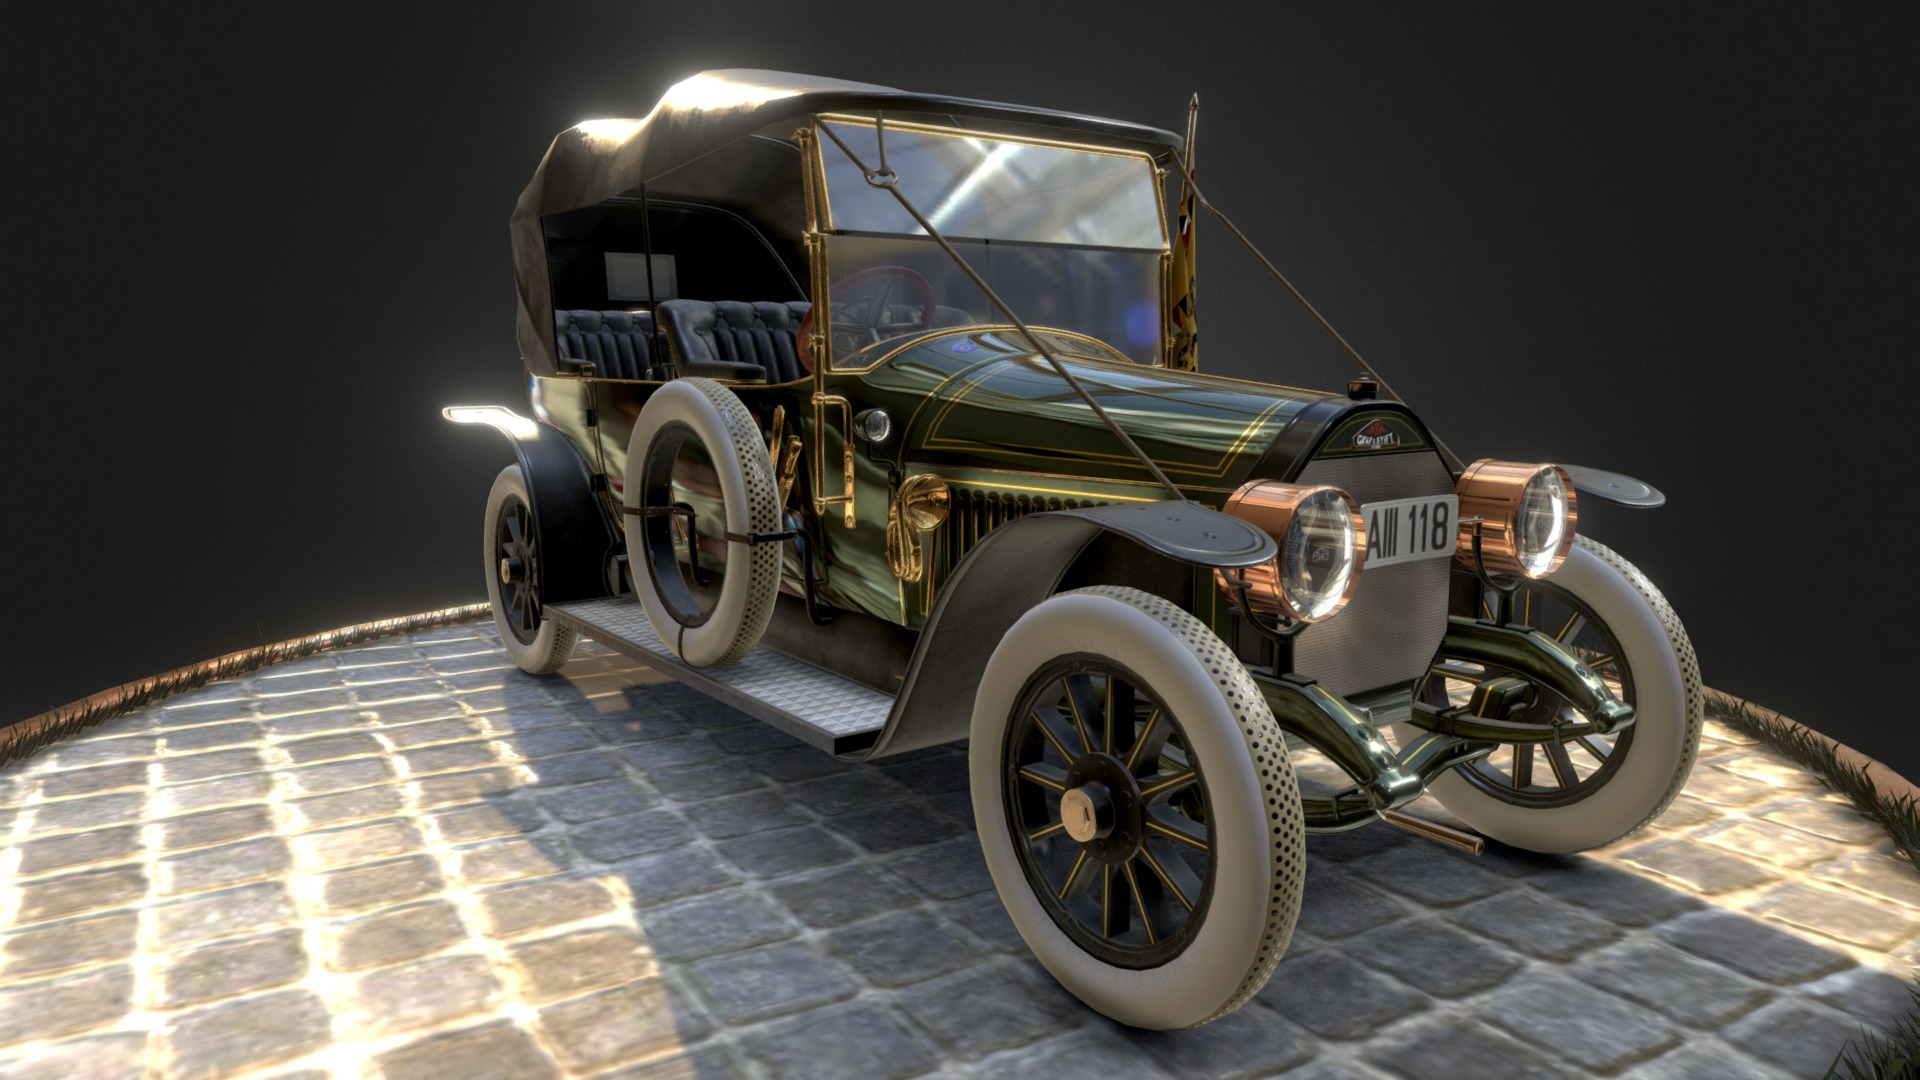 3D model Gräf & Stift Doppel Phaeton - This is a 3D model of the Gräf & Stift Doppel Phaeton. The 3D model is about a car parked on a tile floor.